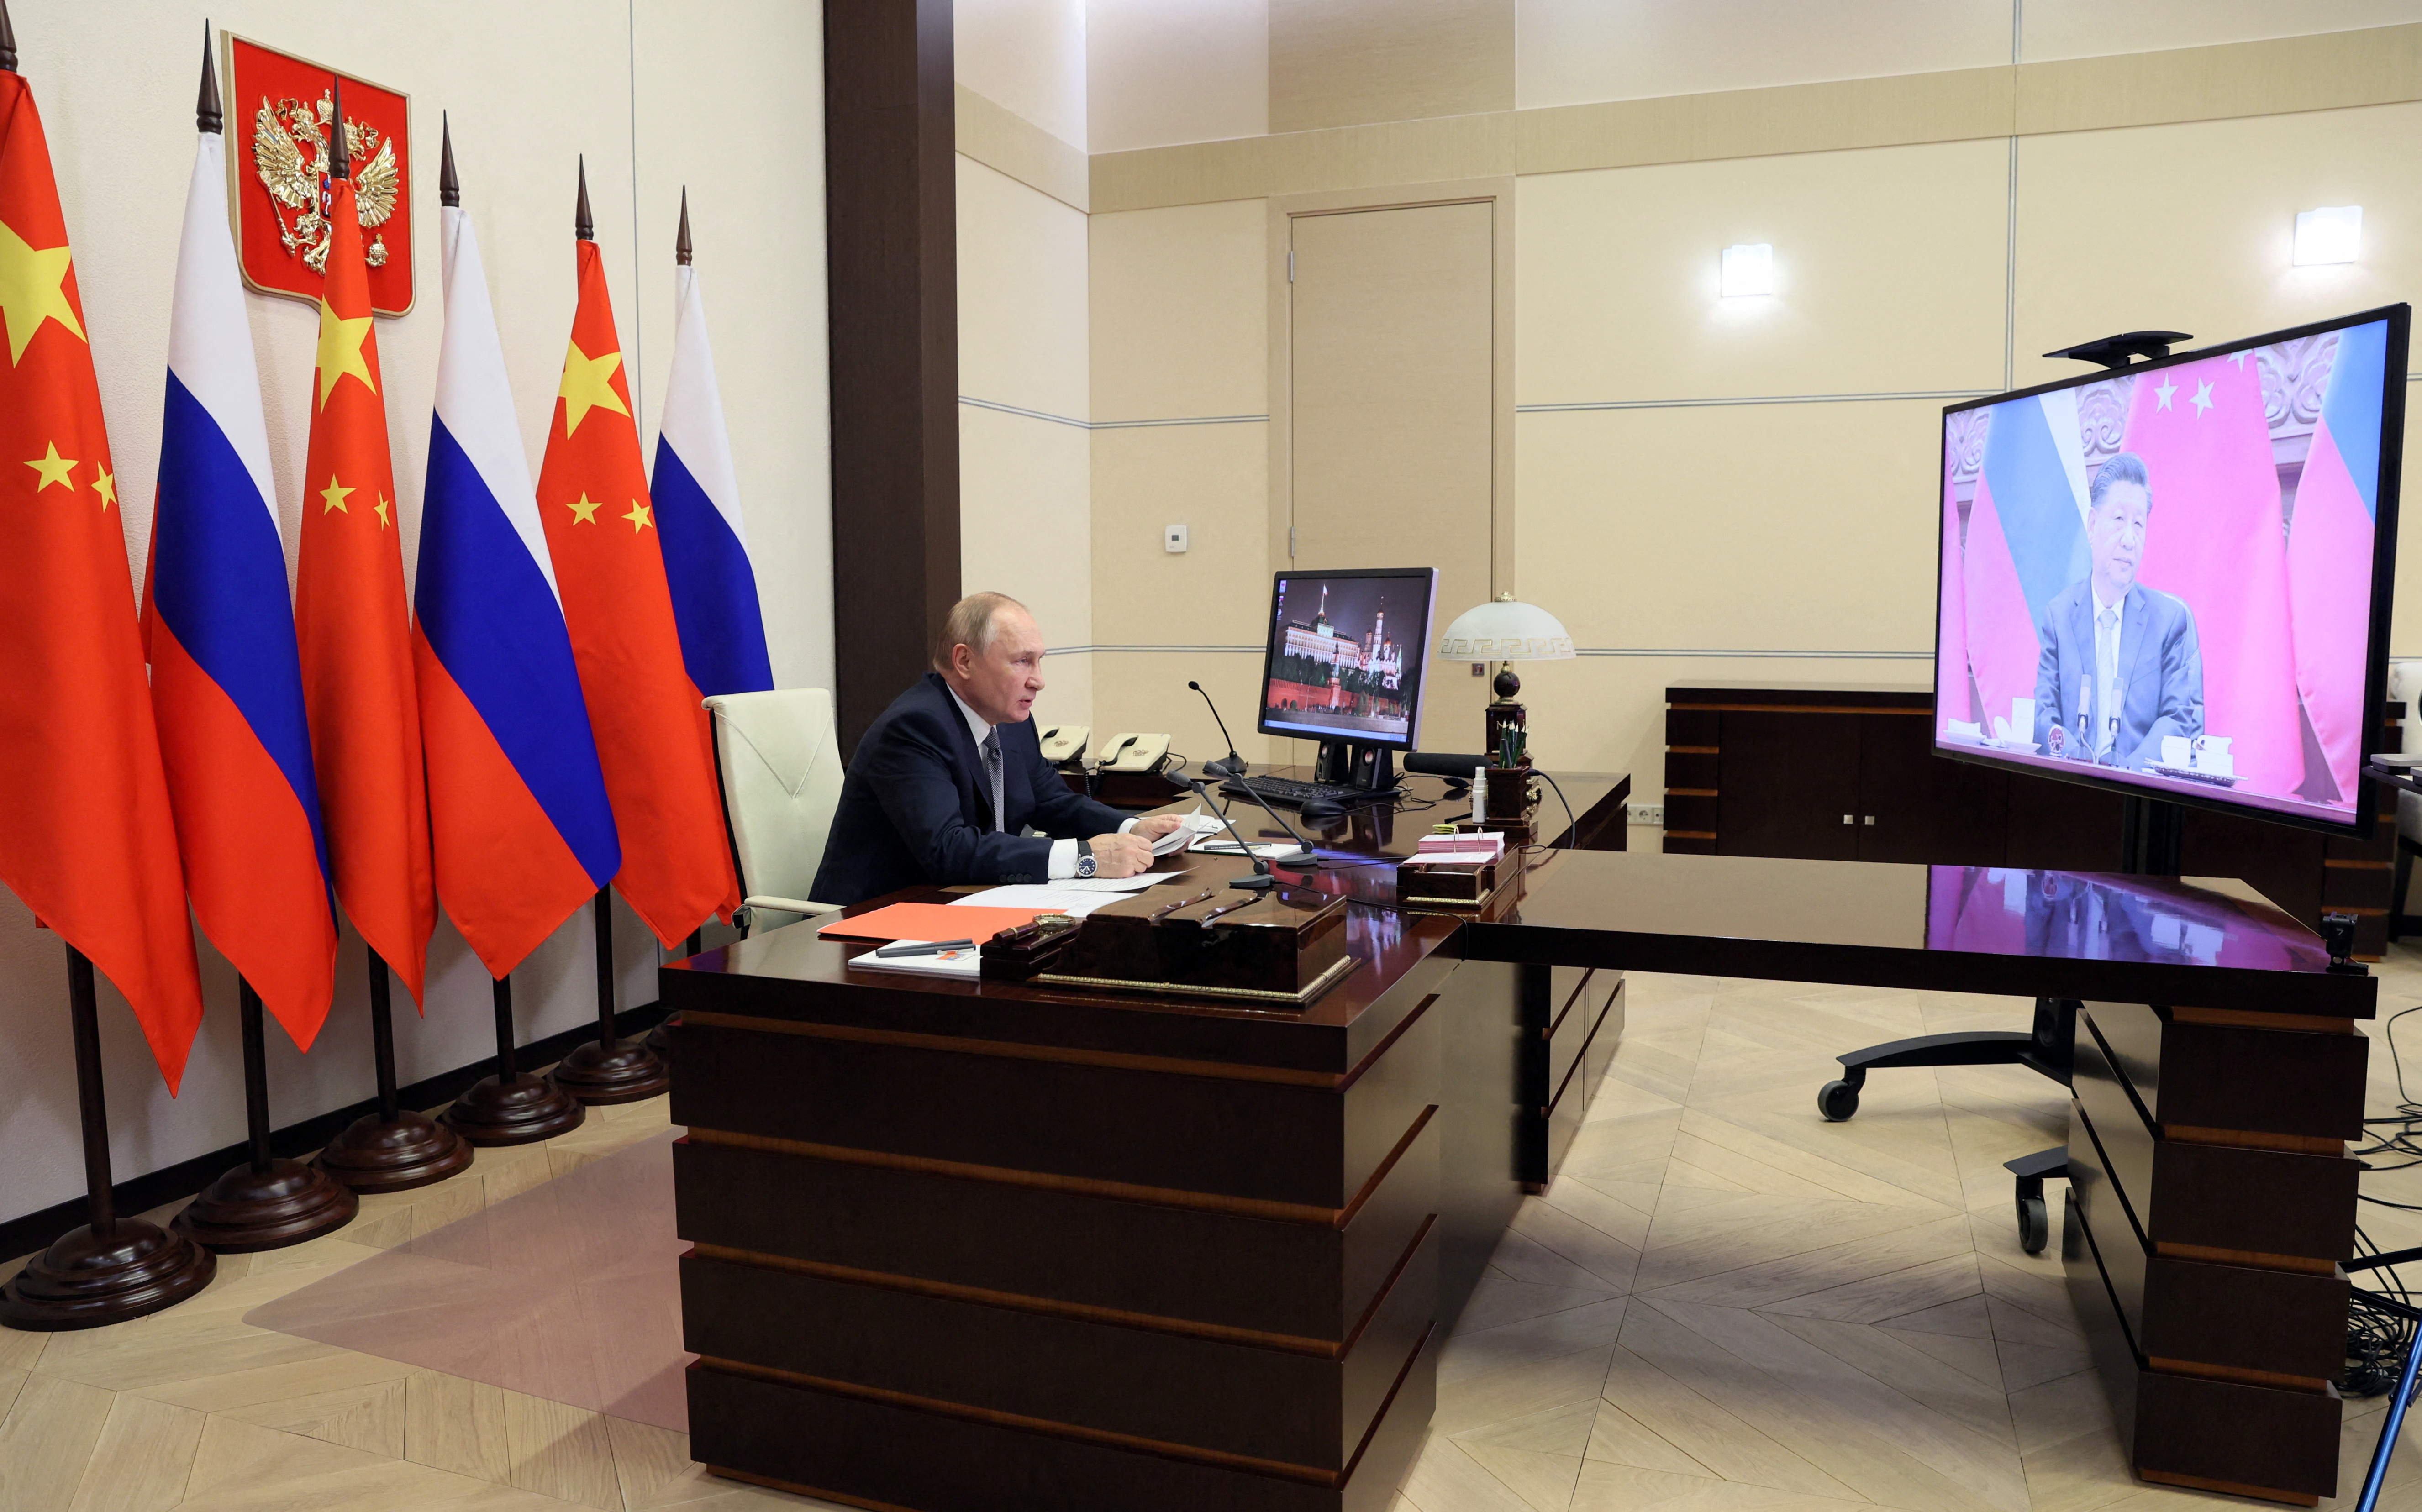 Russian President Vladimir Putin holds talks with Chinese President Xi Jinping via a video link at his residence outside Moscow, Russia December 15, 2021. Sputnik/Mikhail Metzel/Pool via REUTERS 